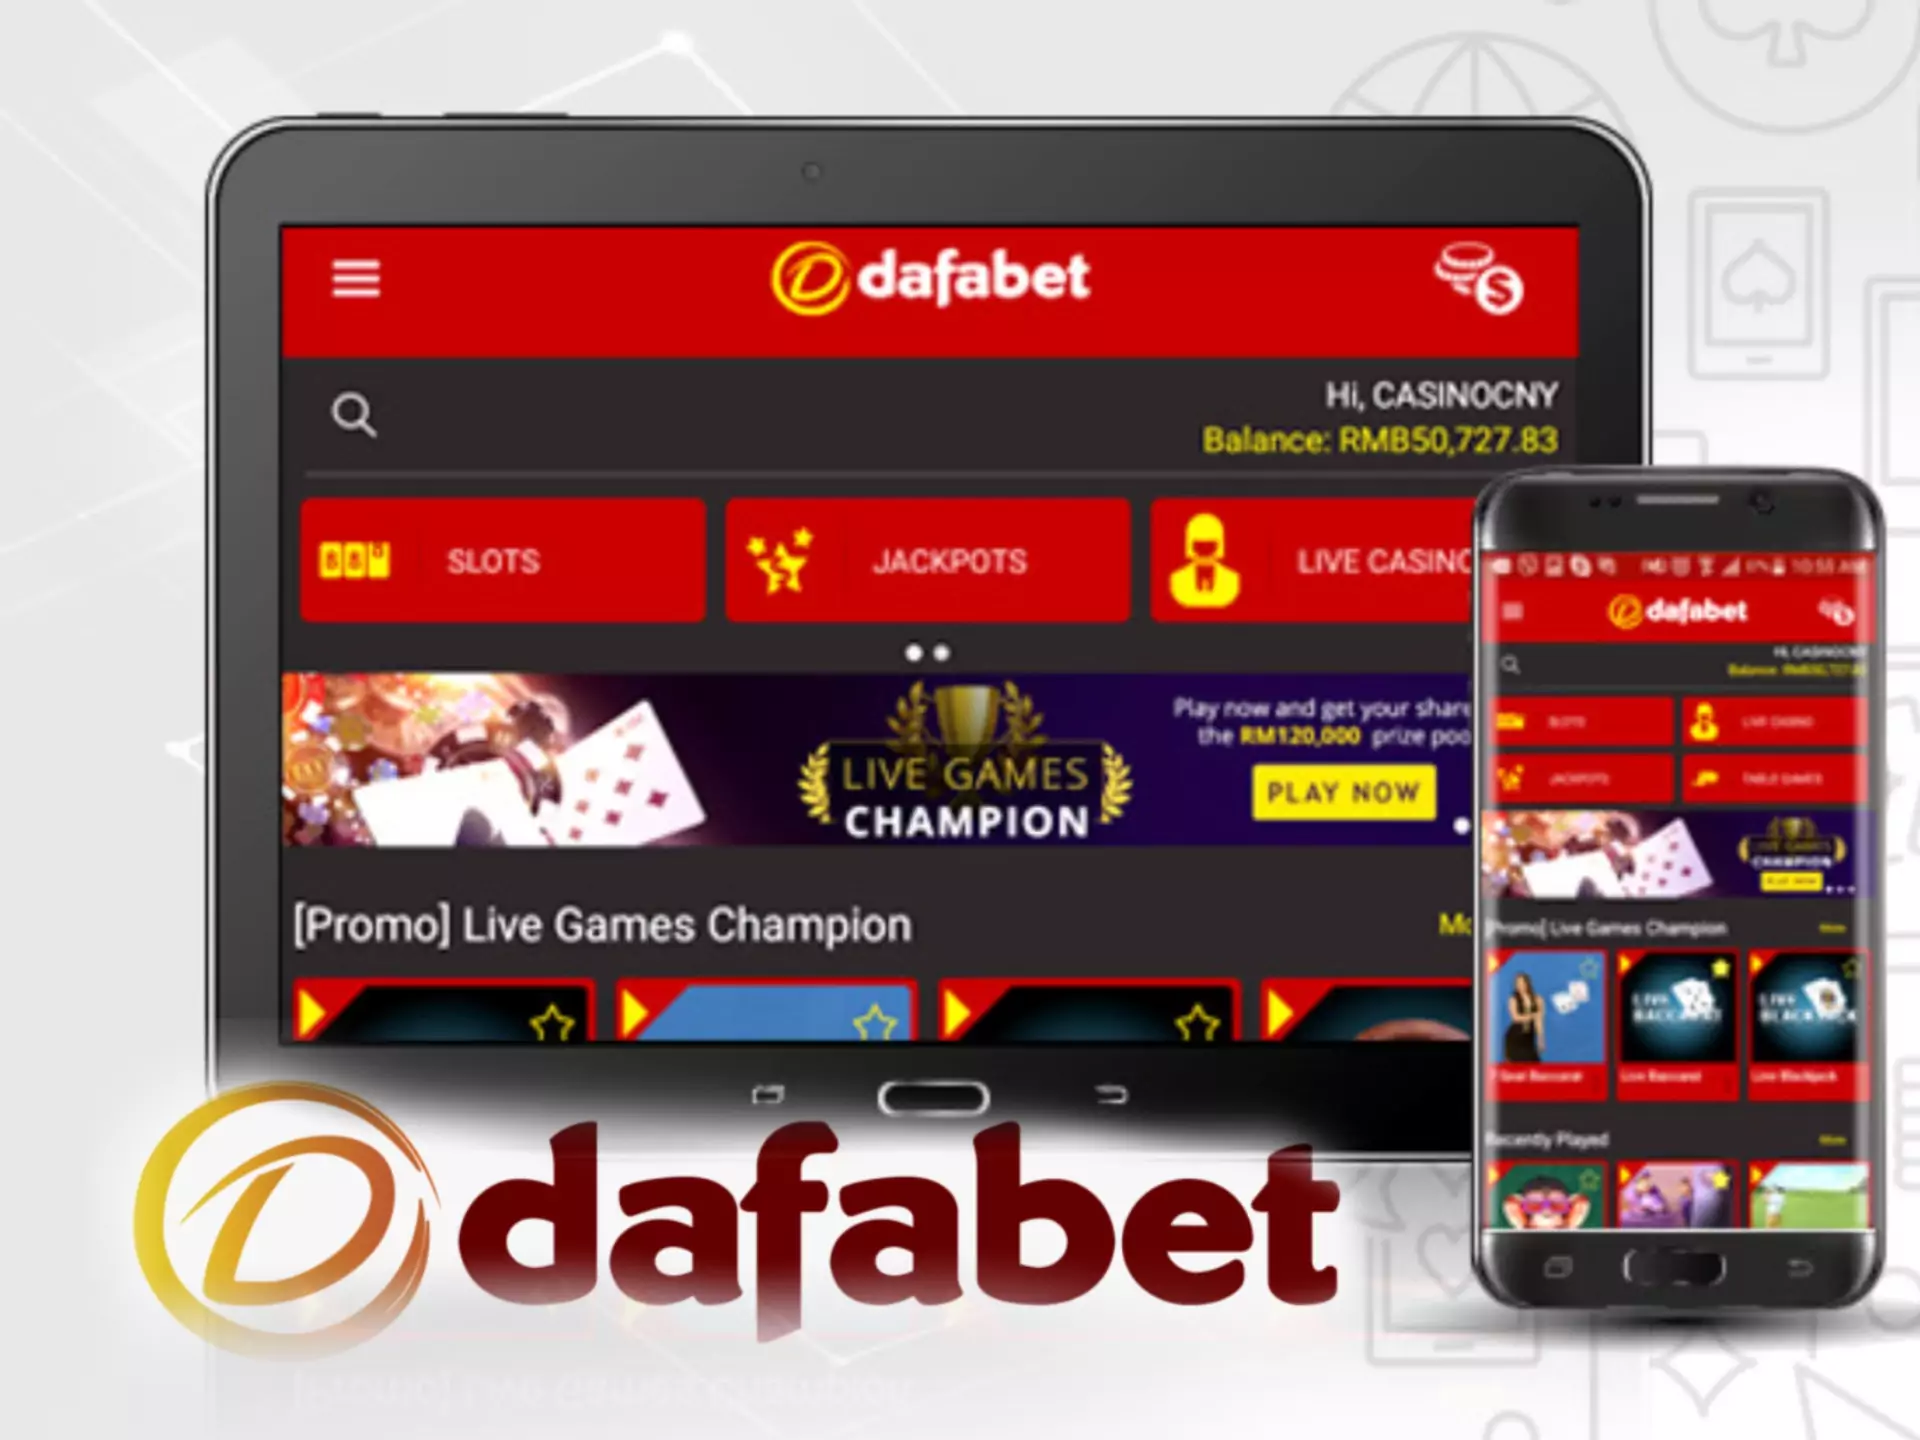 Dafabet app is the most convenient way to place bets and play casino games.